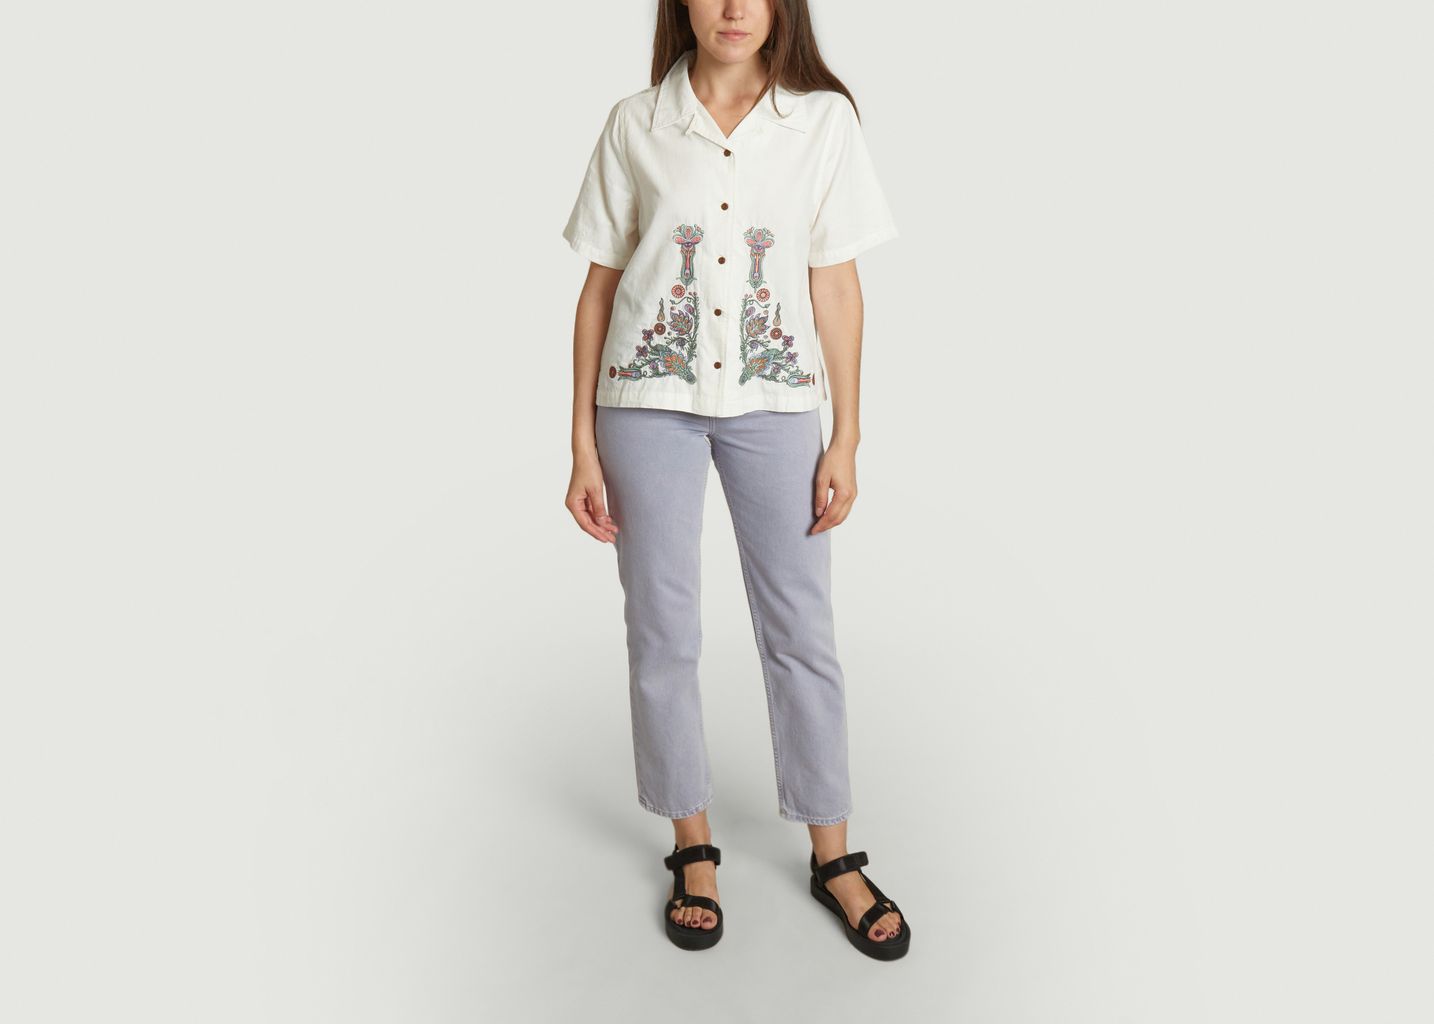 Chemise Moa Floral - Nudie Jeans